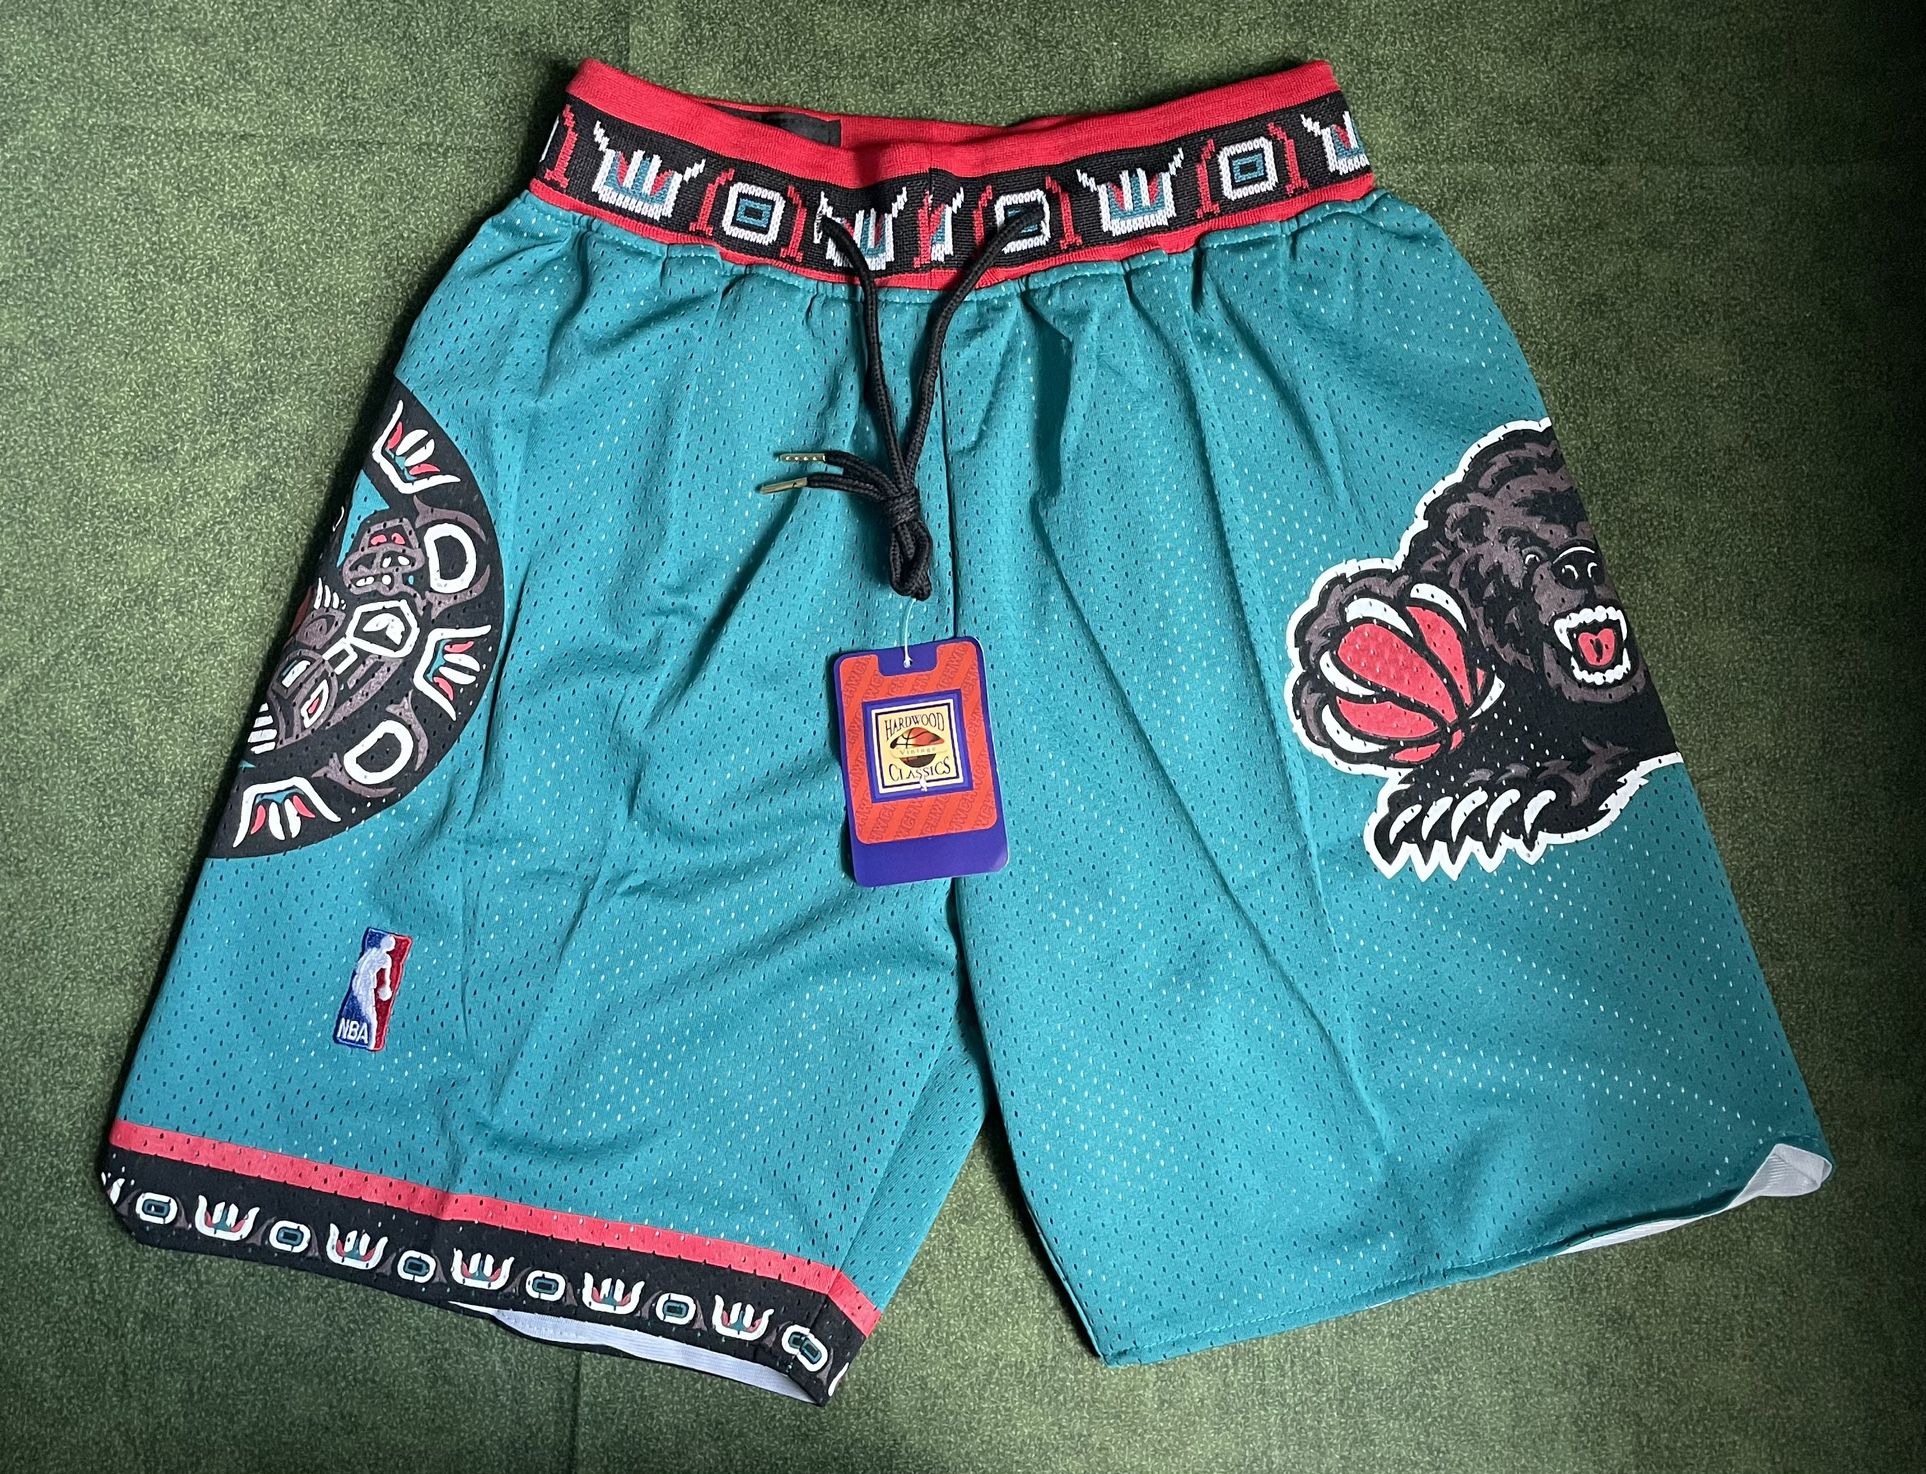 VANCOUVER GRIZZLIES JUST DON NBA BASKETBALL SHORTS BRAND NEW WITH TAGS SIZES MEDIUM AND LARGE AVAILABLE